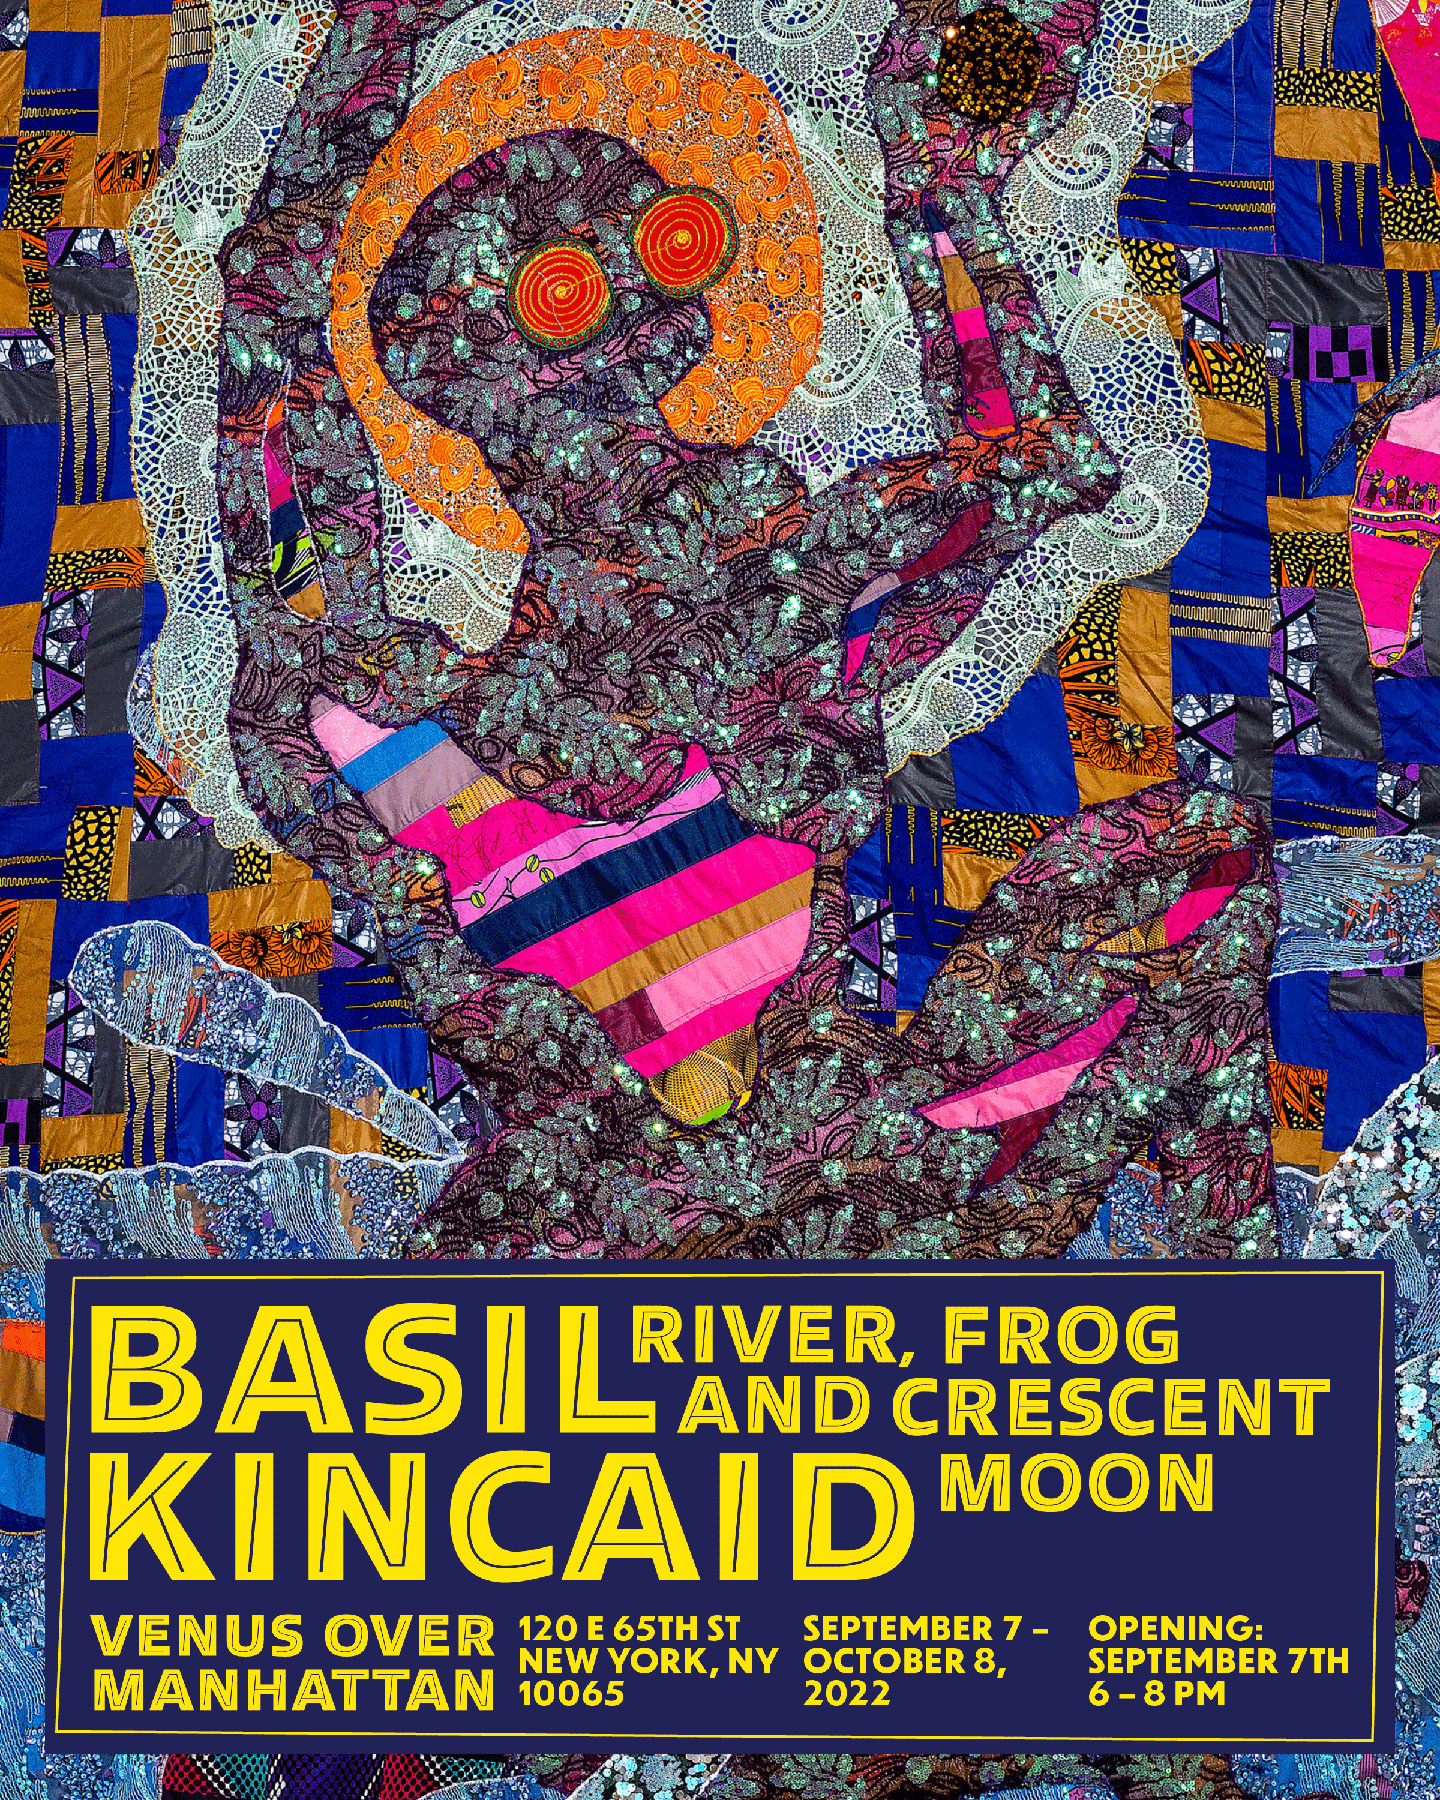 Basil Kincaid: River, Frog, and Crescent Moon
September 7 - October 8, 2022
120 East 65th Street

Image Link